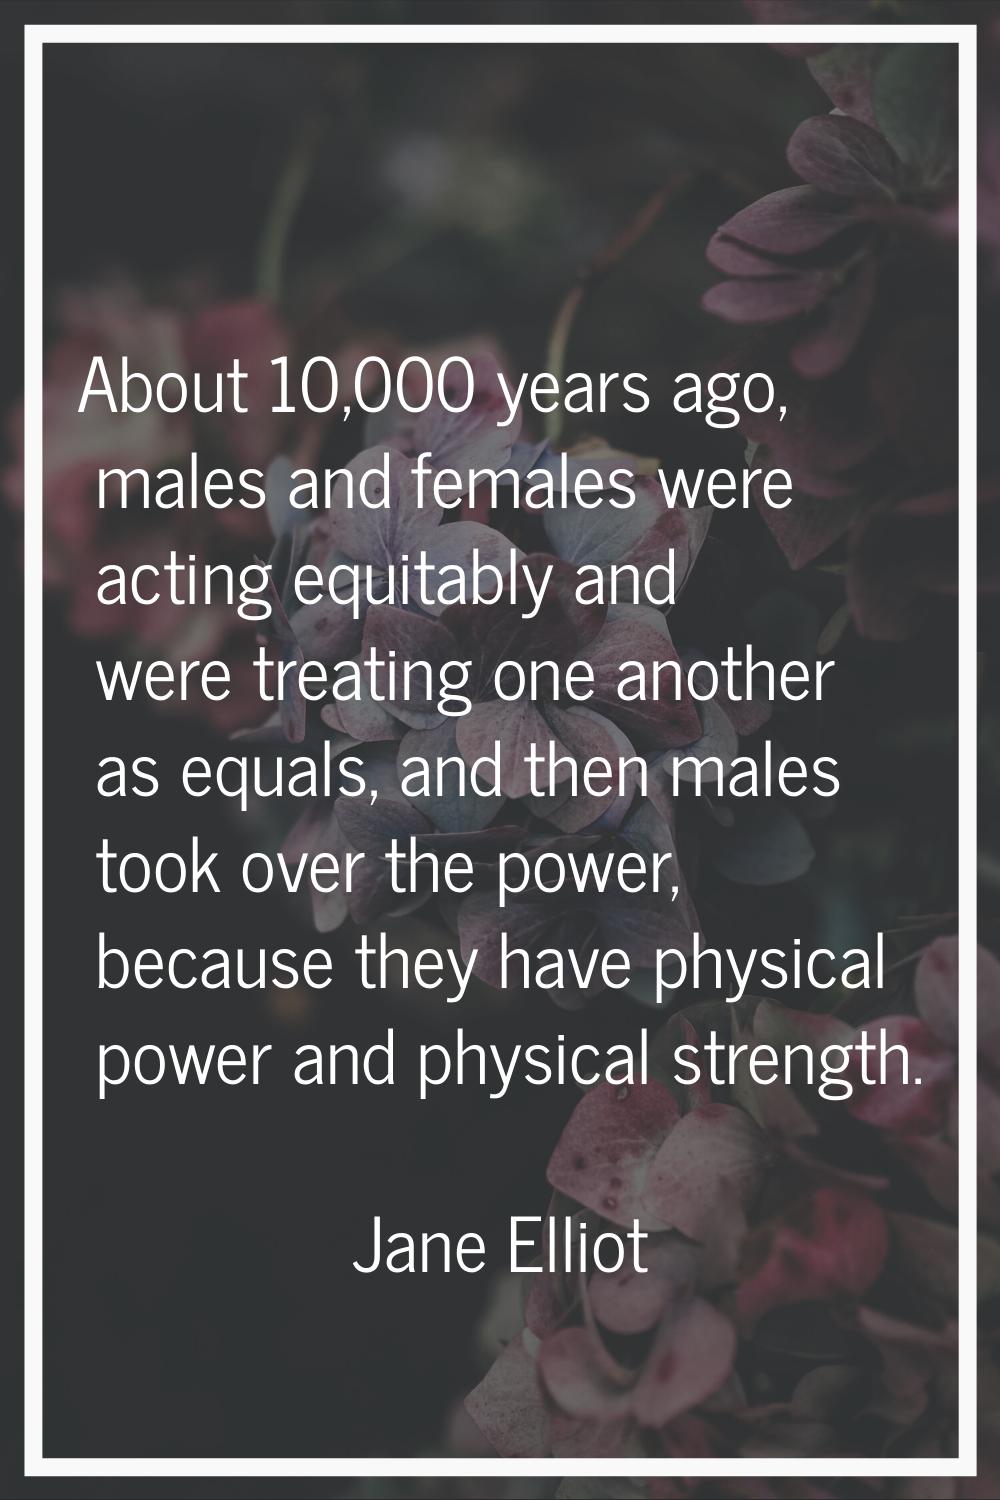 About 10,000 years ago, males and females were acting equitably and were treating one another as eq